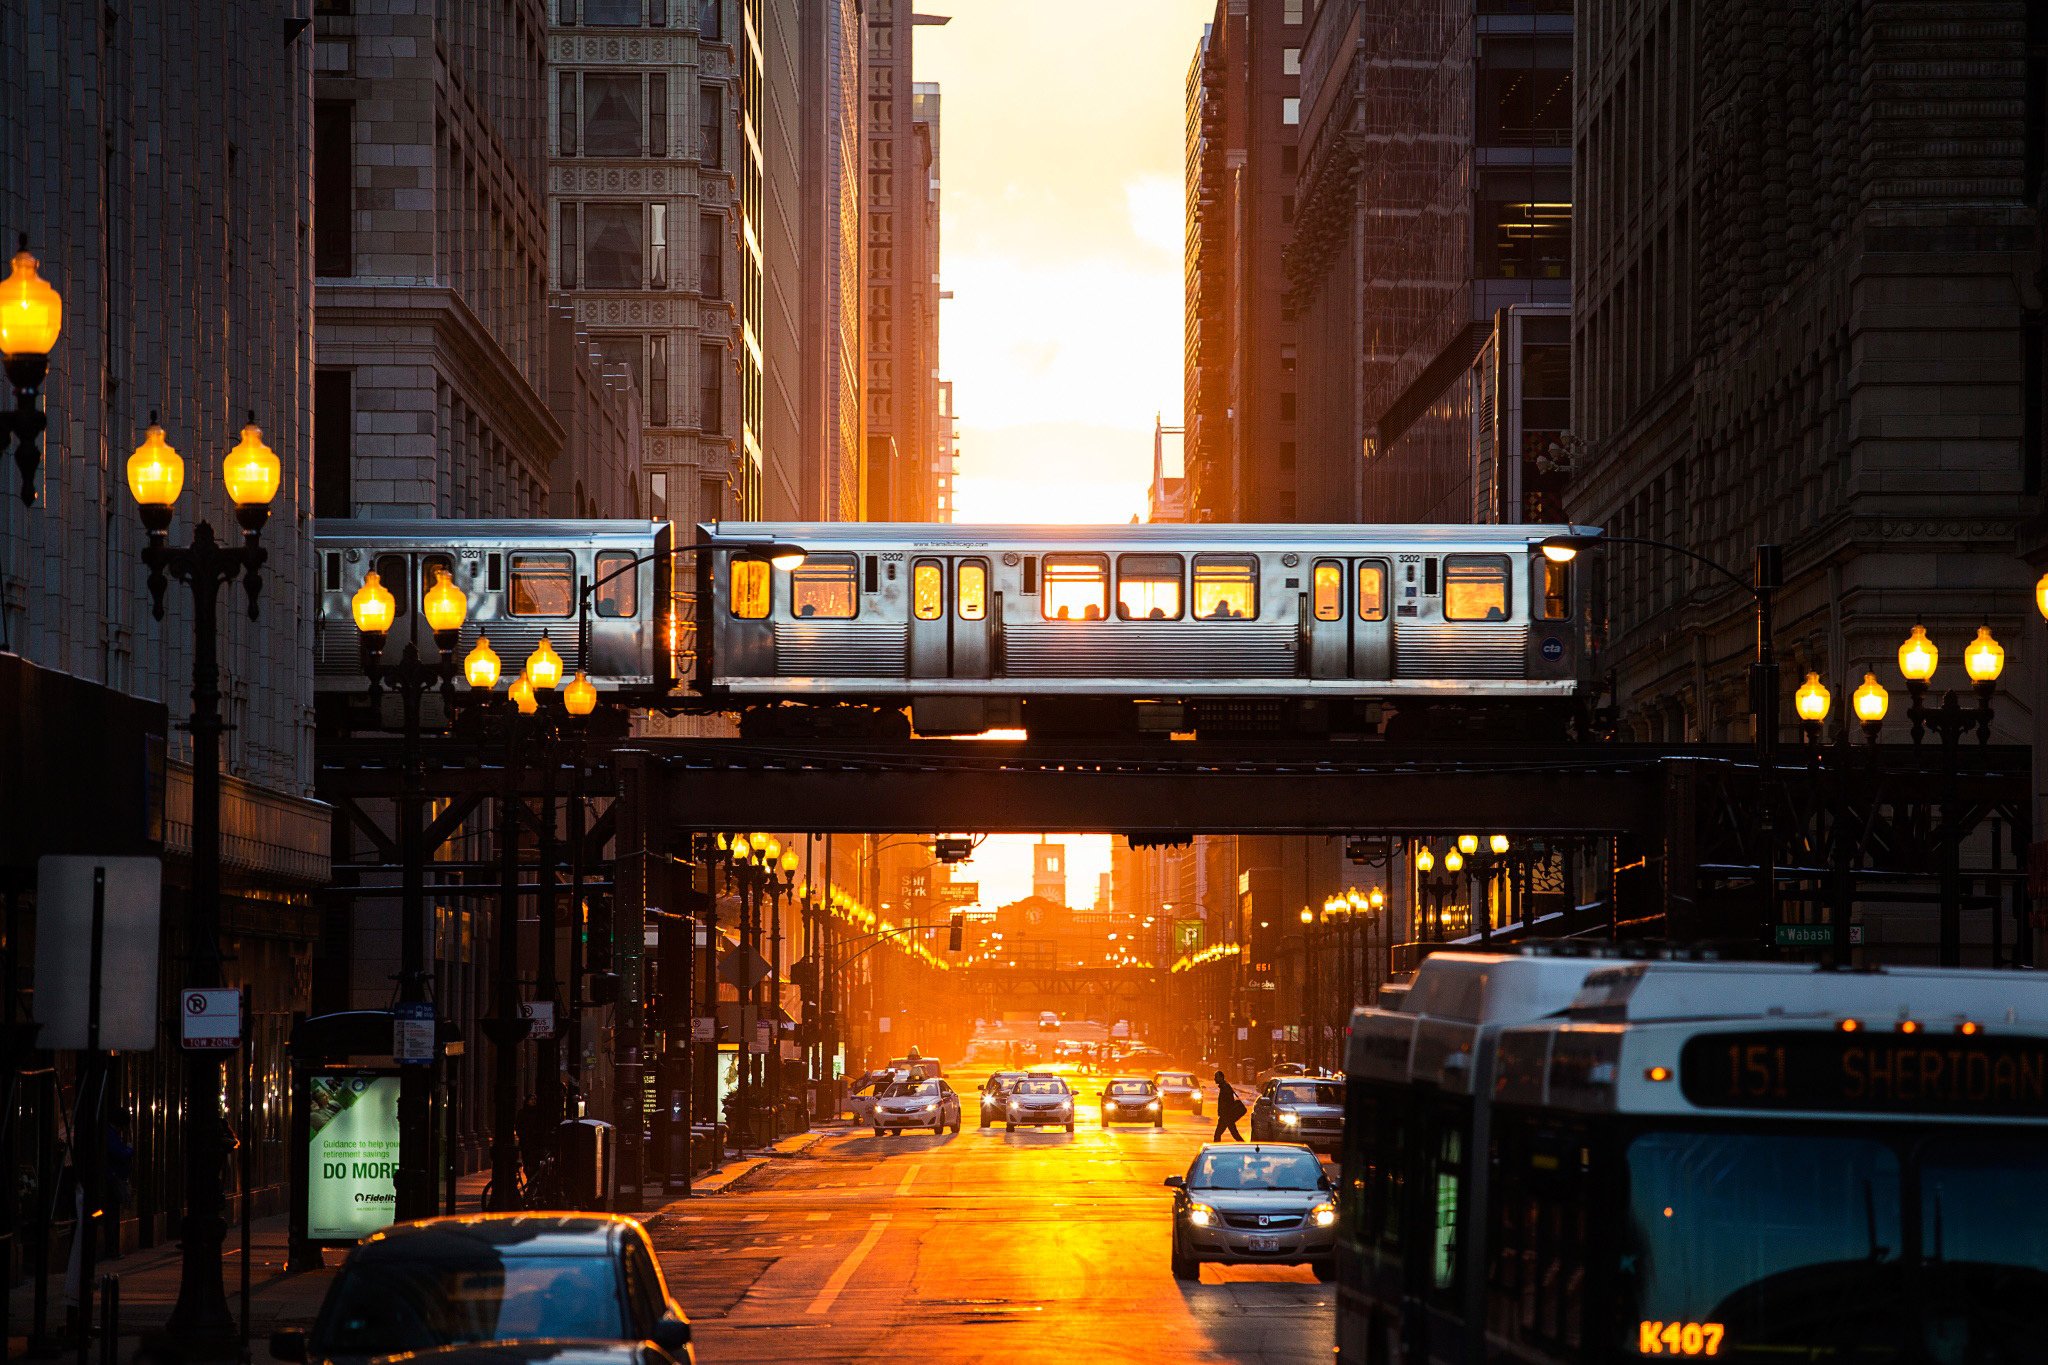 chicago, Illinois, Usa, Chicago, Usa, Cities, Palaces, Buildings, Road, Car, Train, Subway, Street, Lights, Lights, Sunset, Evening Wallpaper